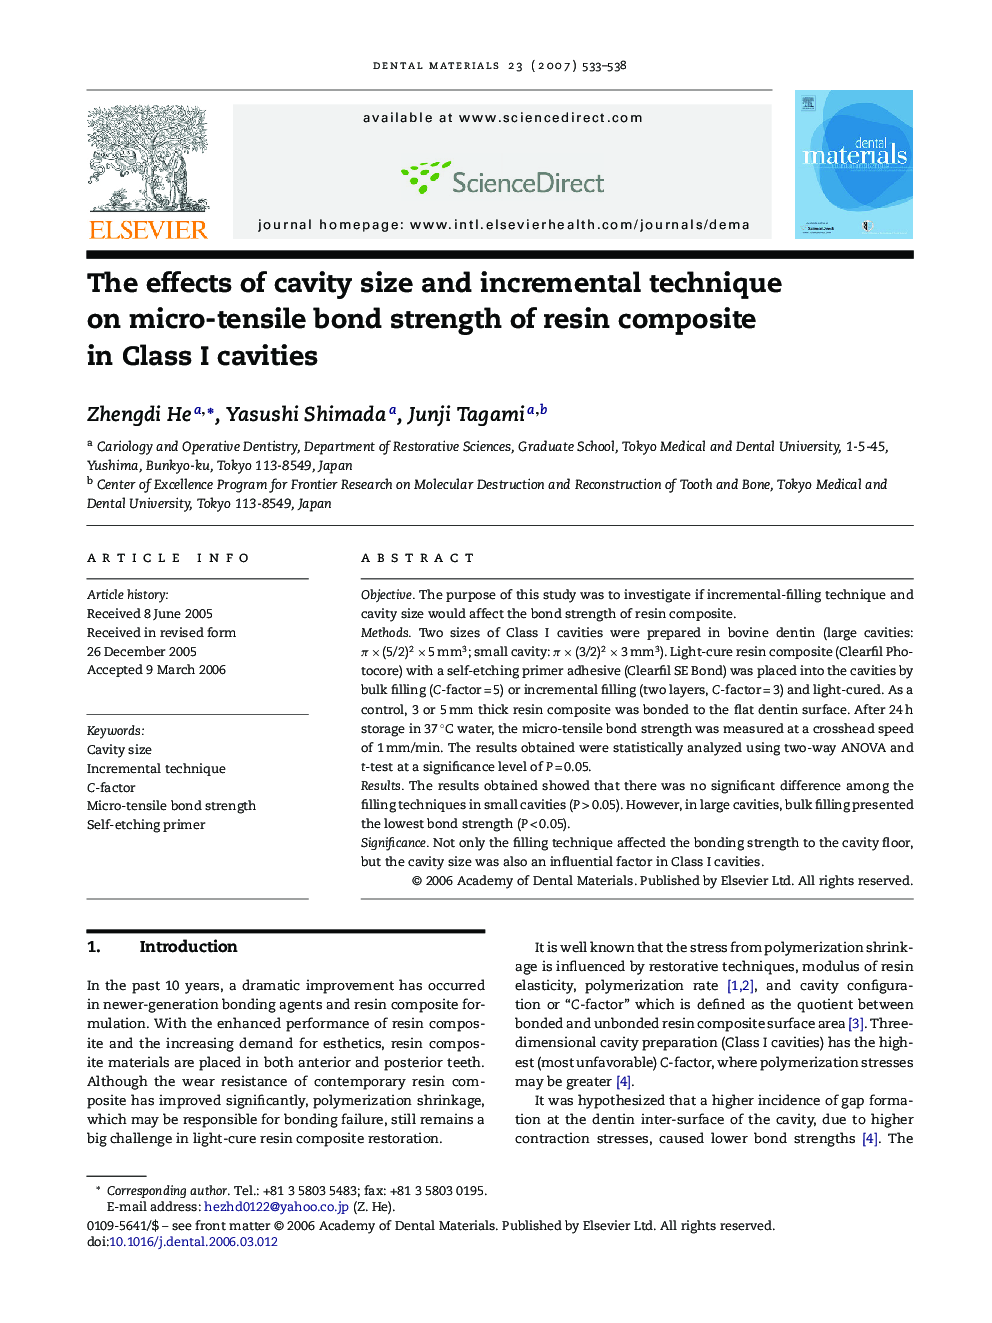 The effects of cavity size and incremental technique on micro-tensile bond strength of resin composite in Class I cavities